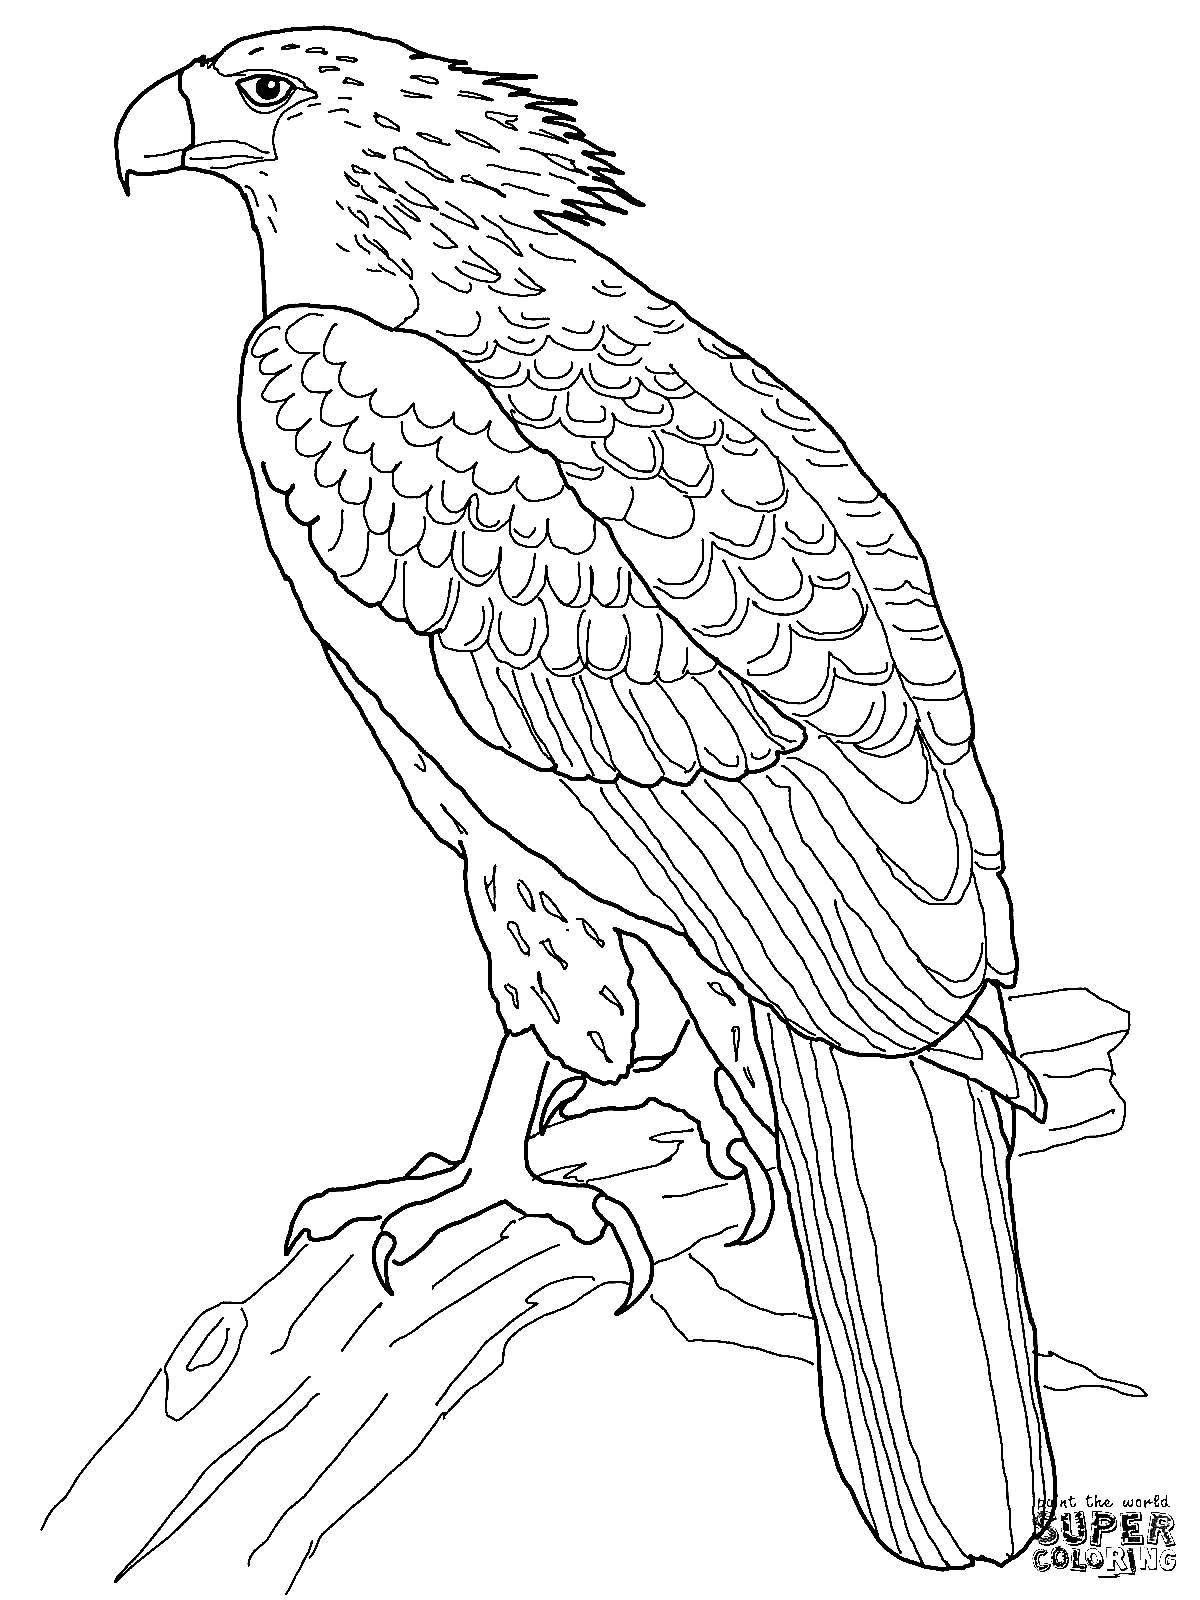 Merlin coloring page